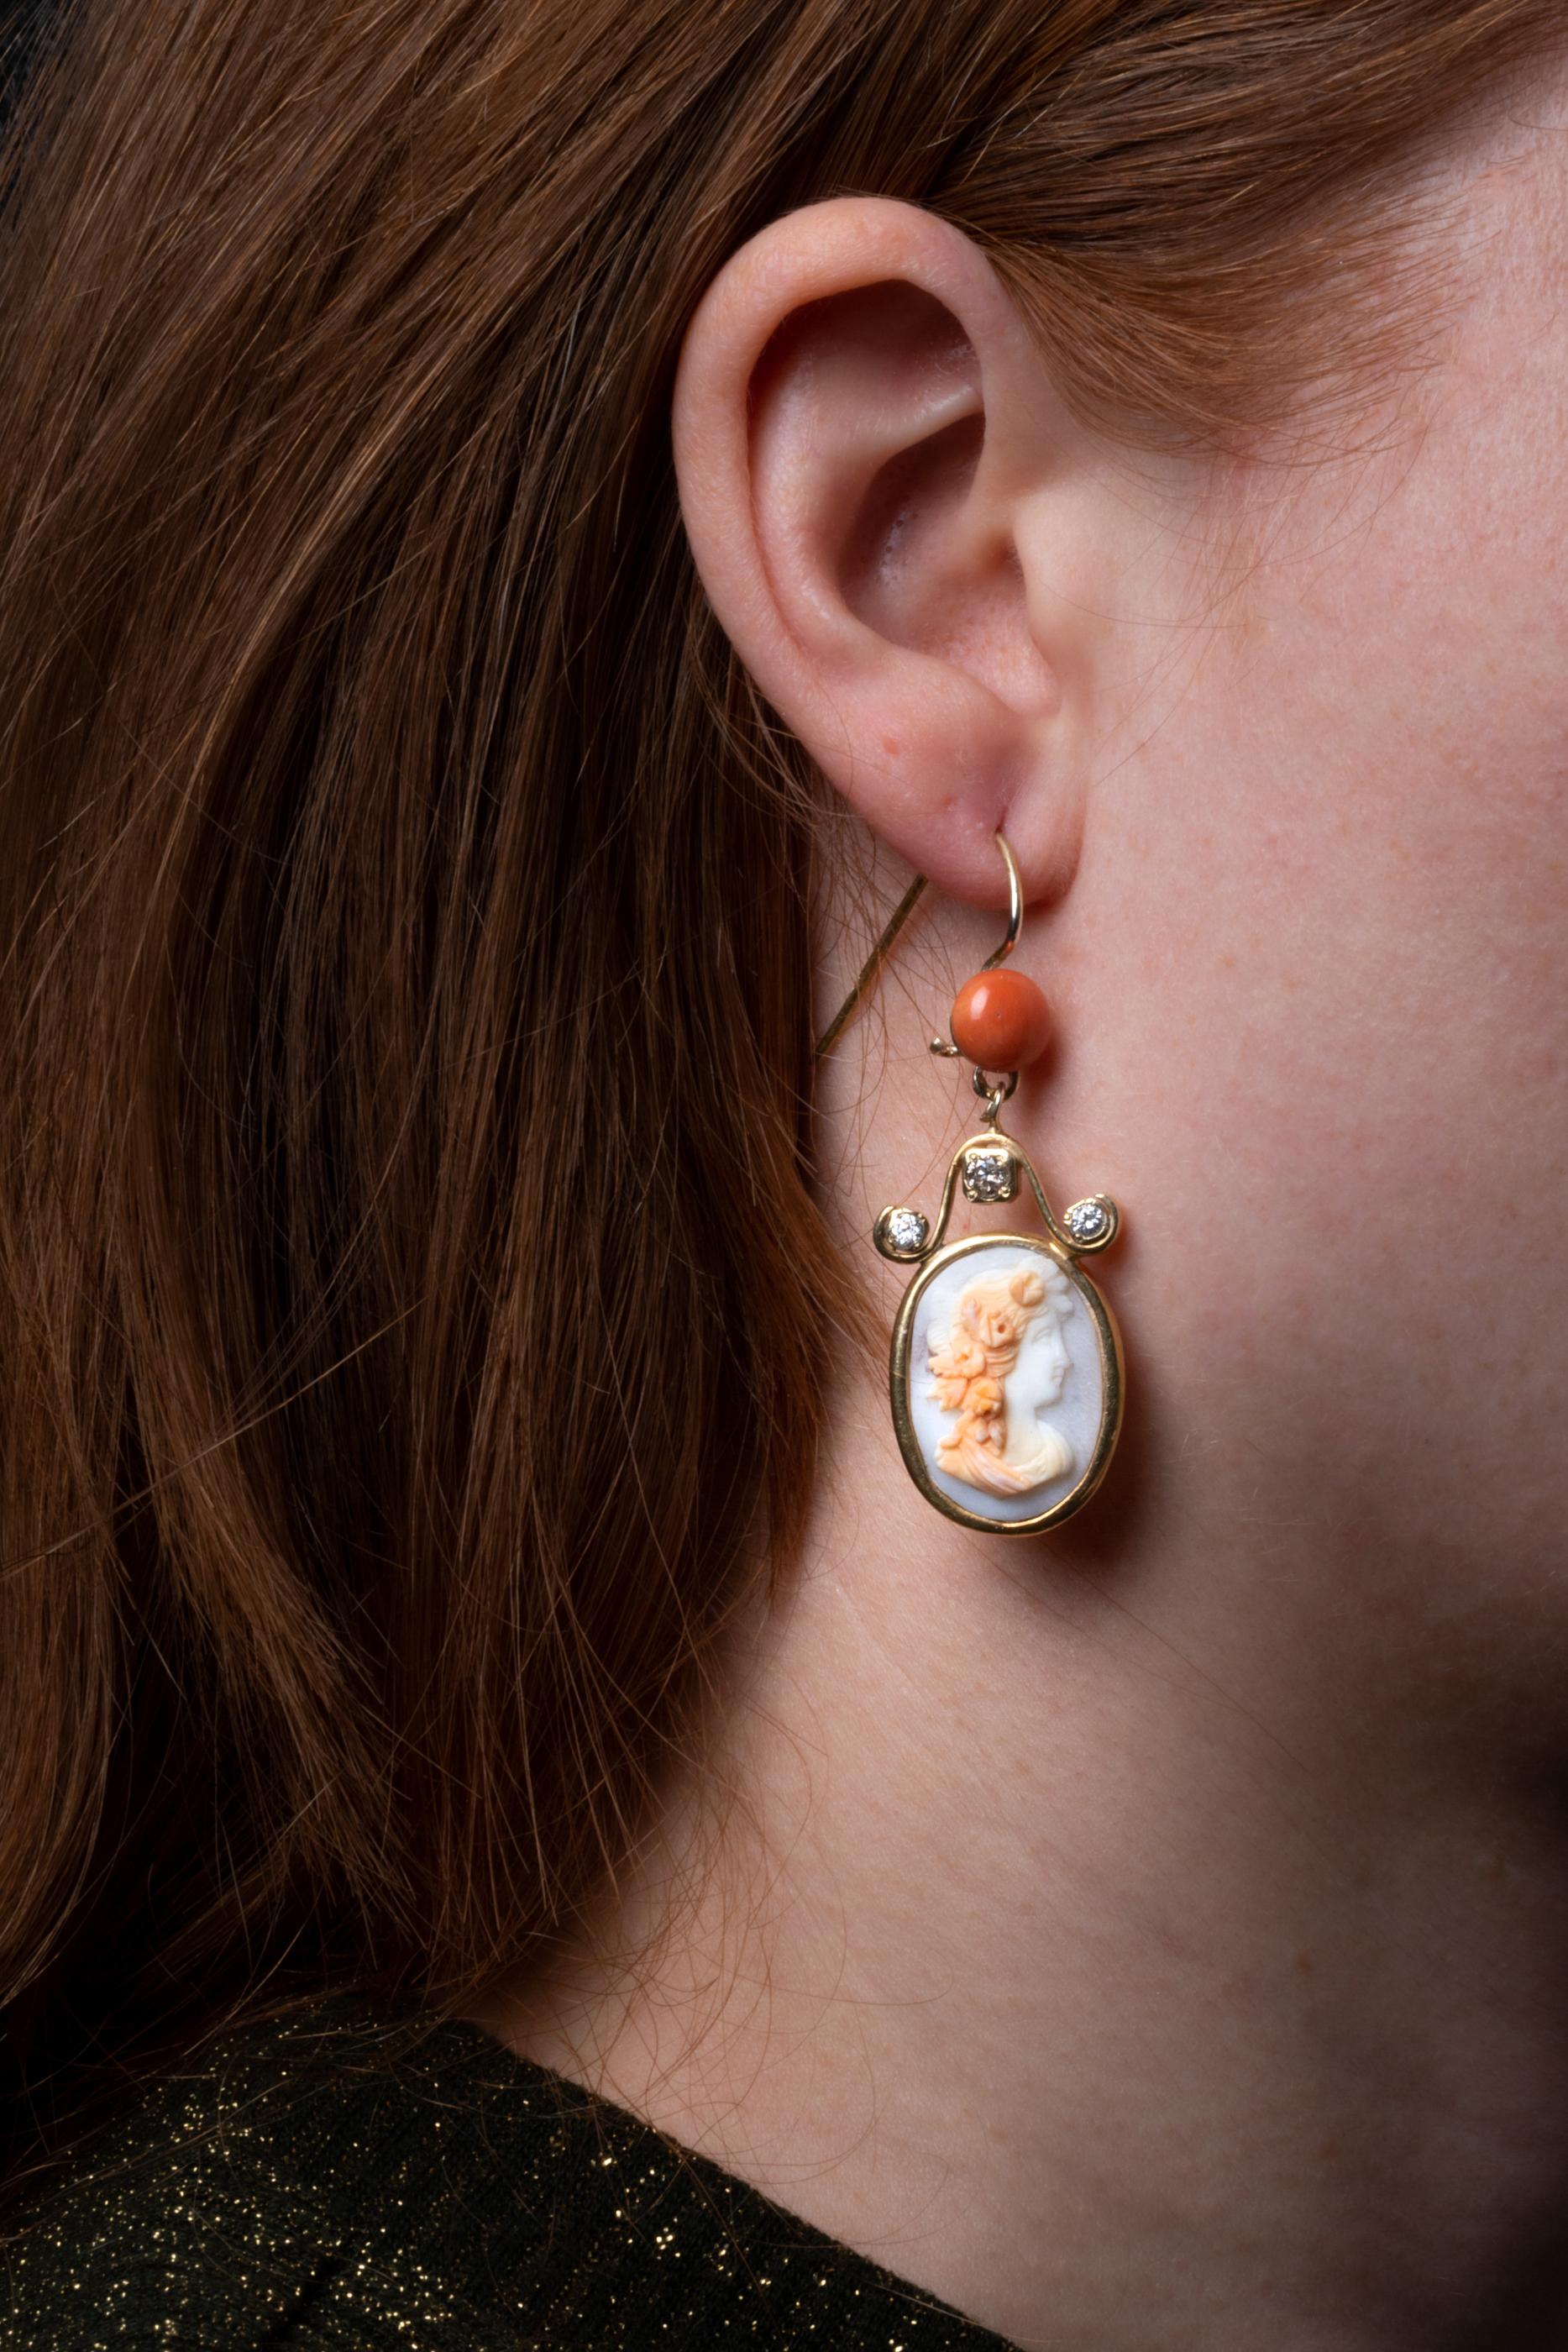 Round Cut Antique Edwardian Hard Stone Cameo Earrings, Antique Coral and Diamond Earrings